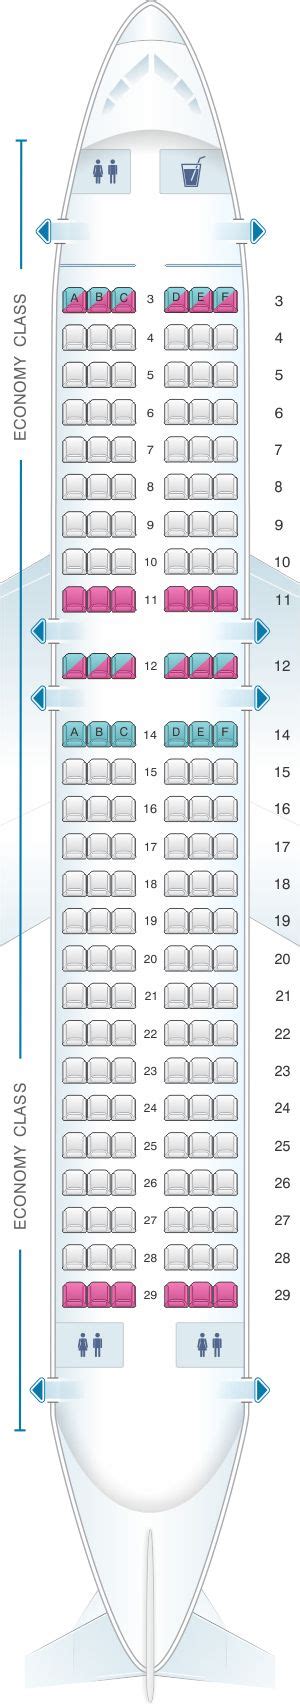 Seat Map Allegiant Air Airbus A319 Best Airplane American Airlines